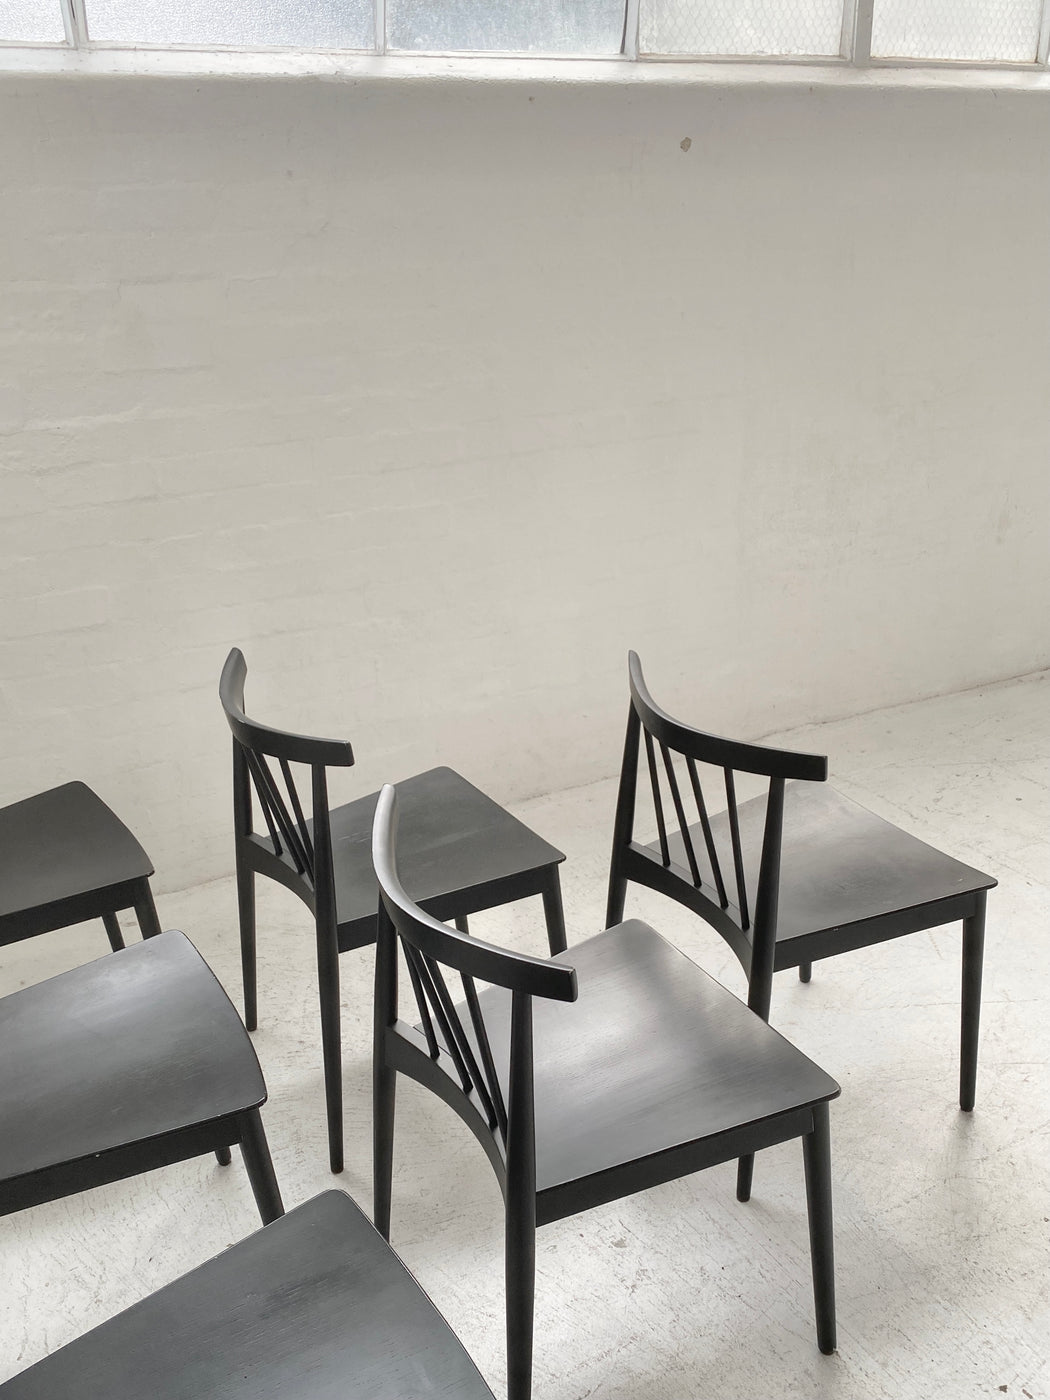 Lievore Altherr Molina ‘Smile’ Chairs